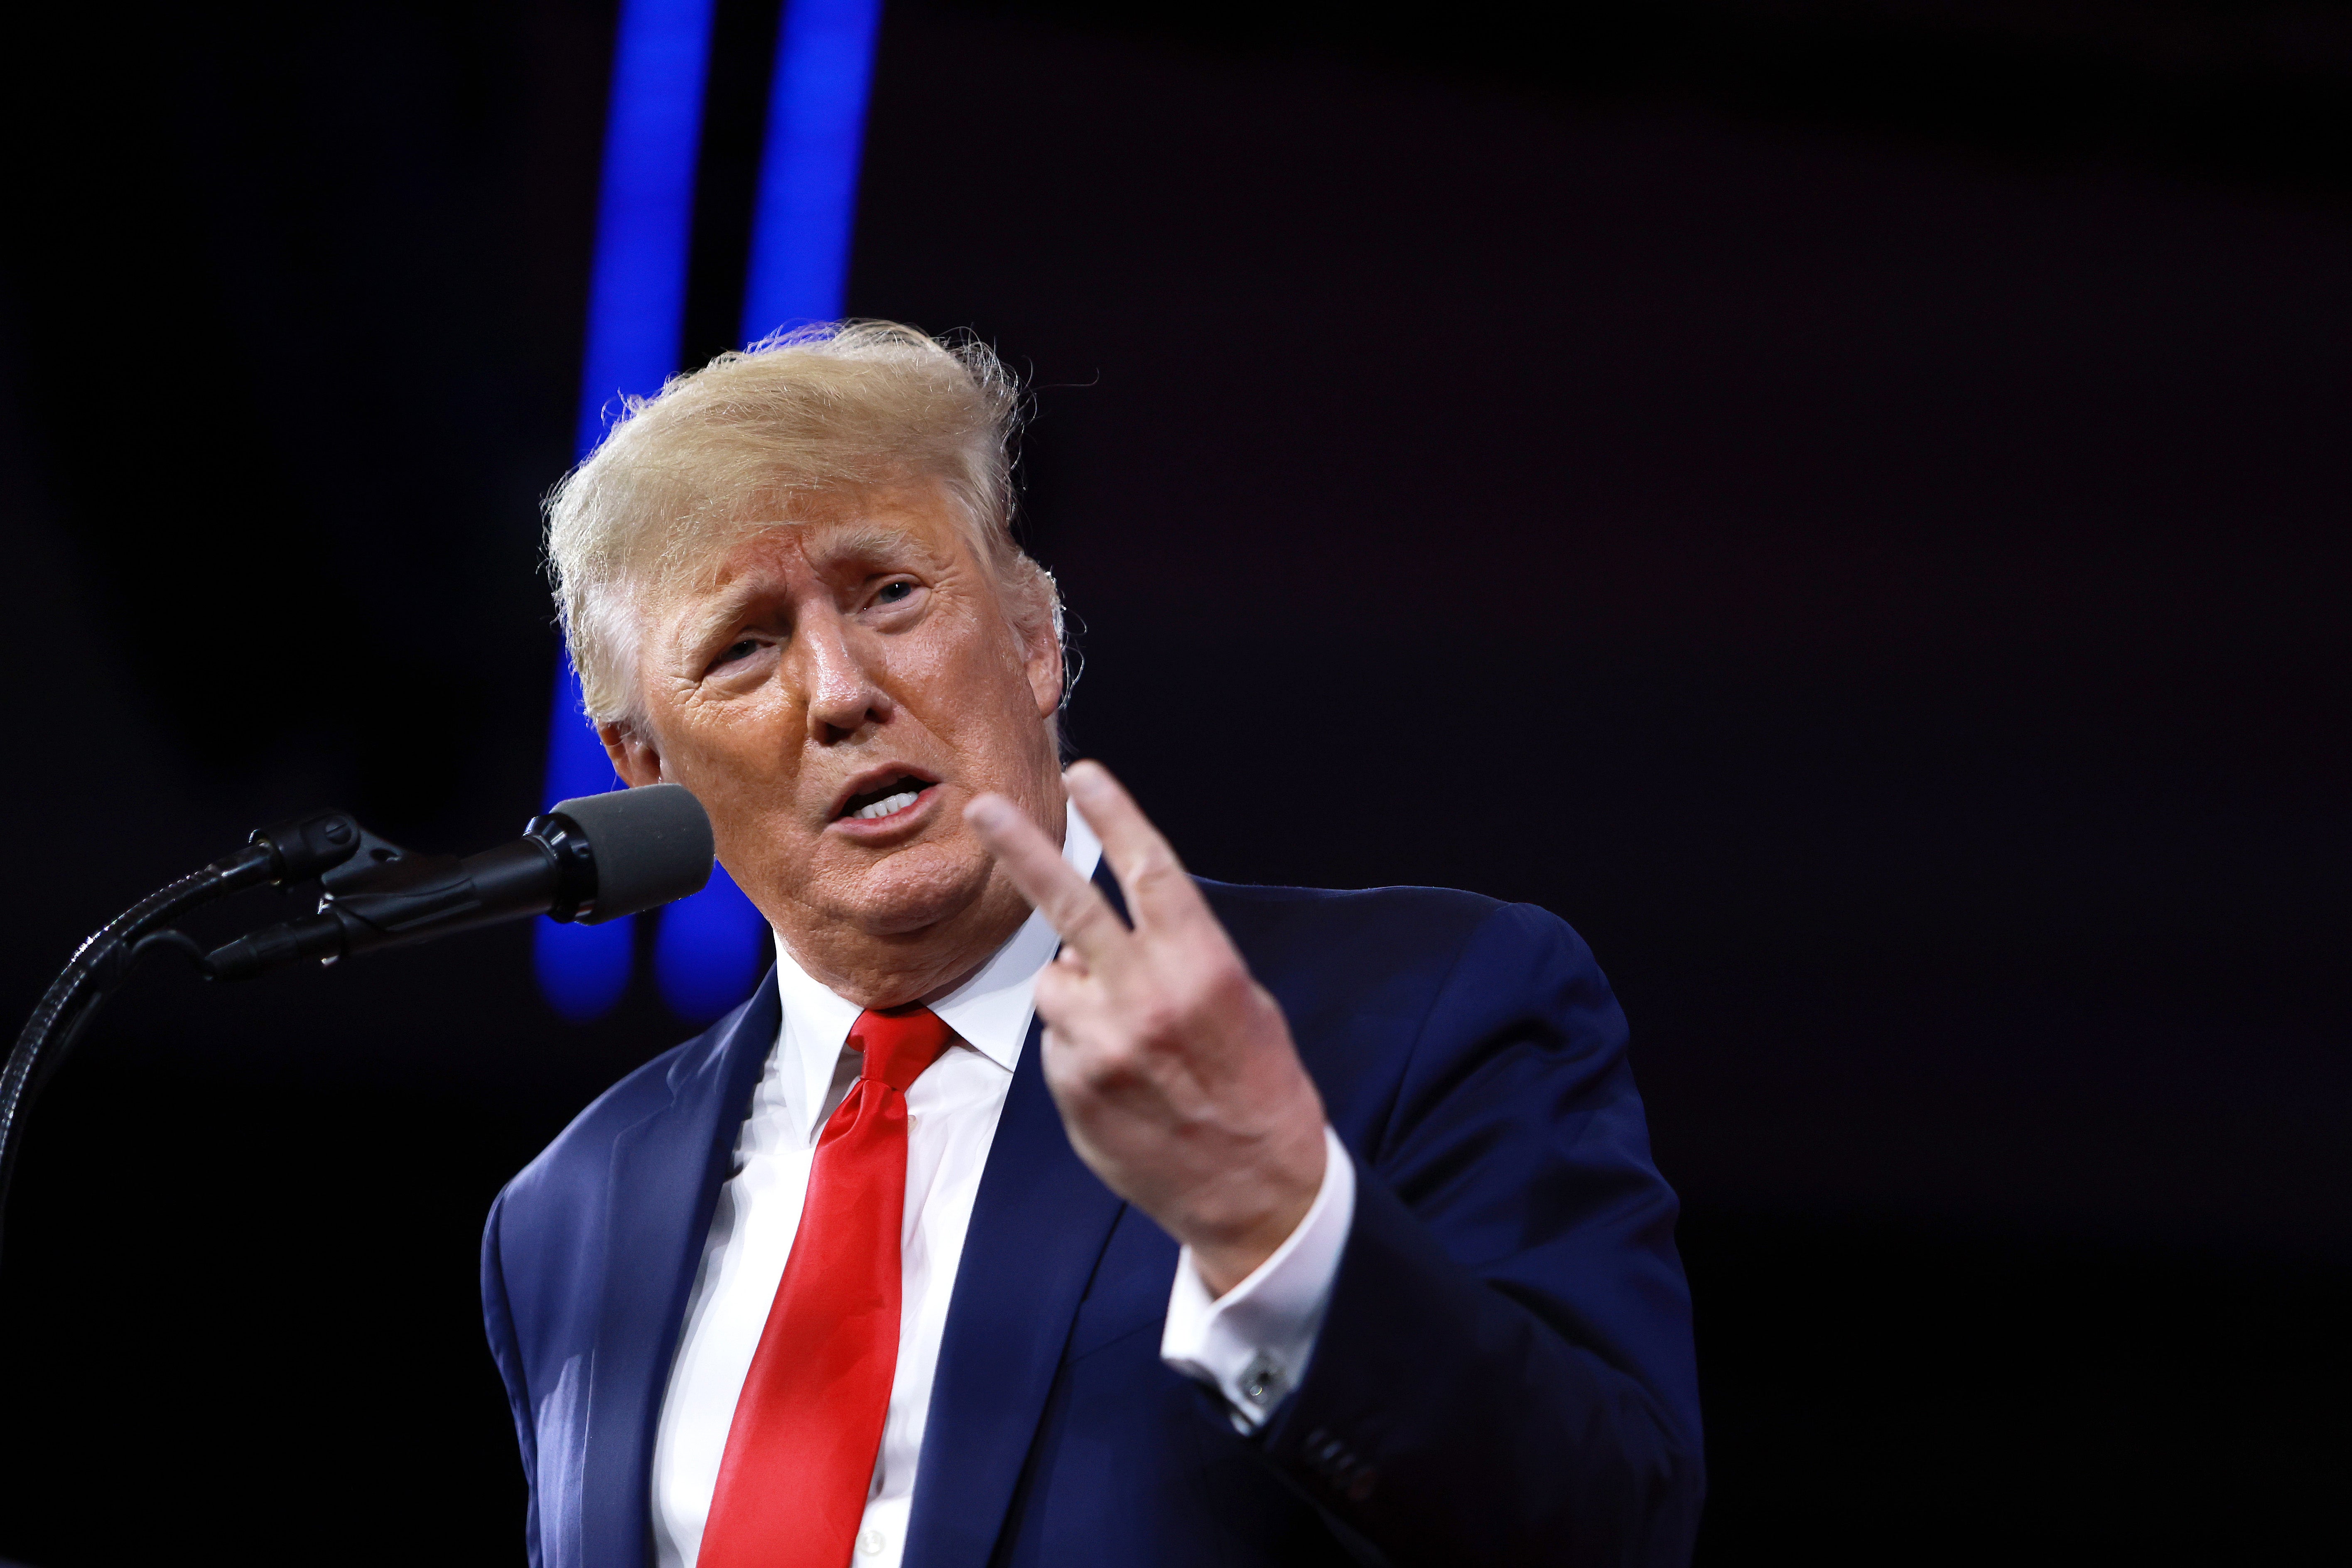 President Donald Trump speaks during the Conservative Political Action Conference on Saturday